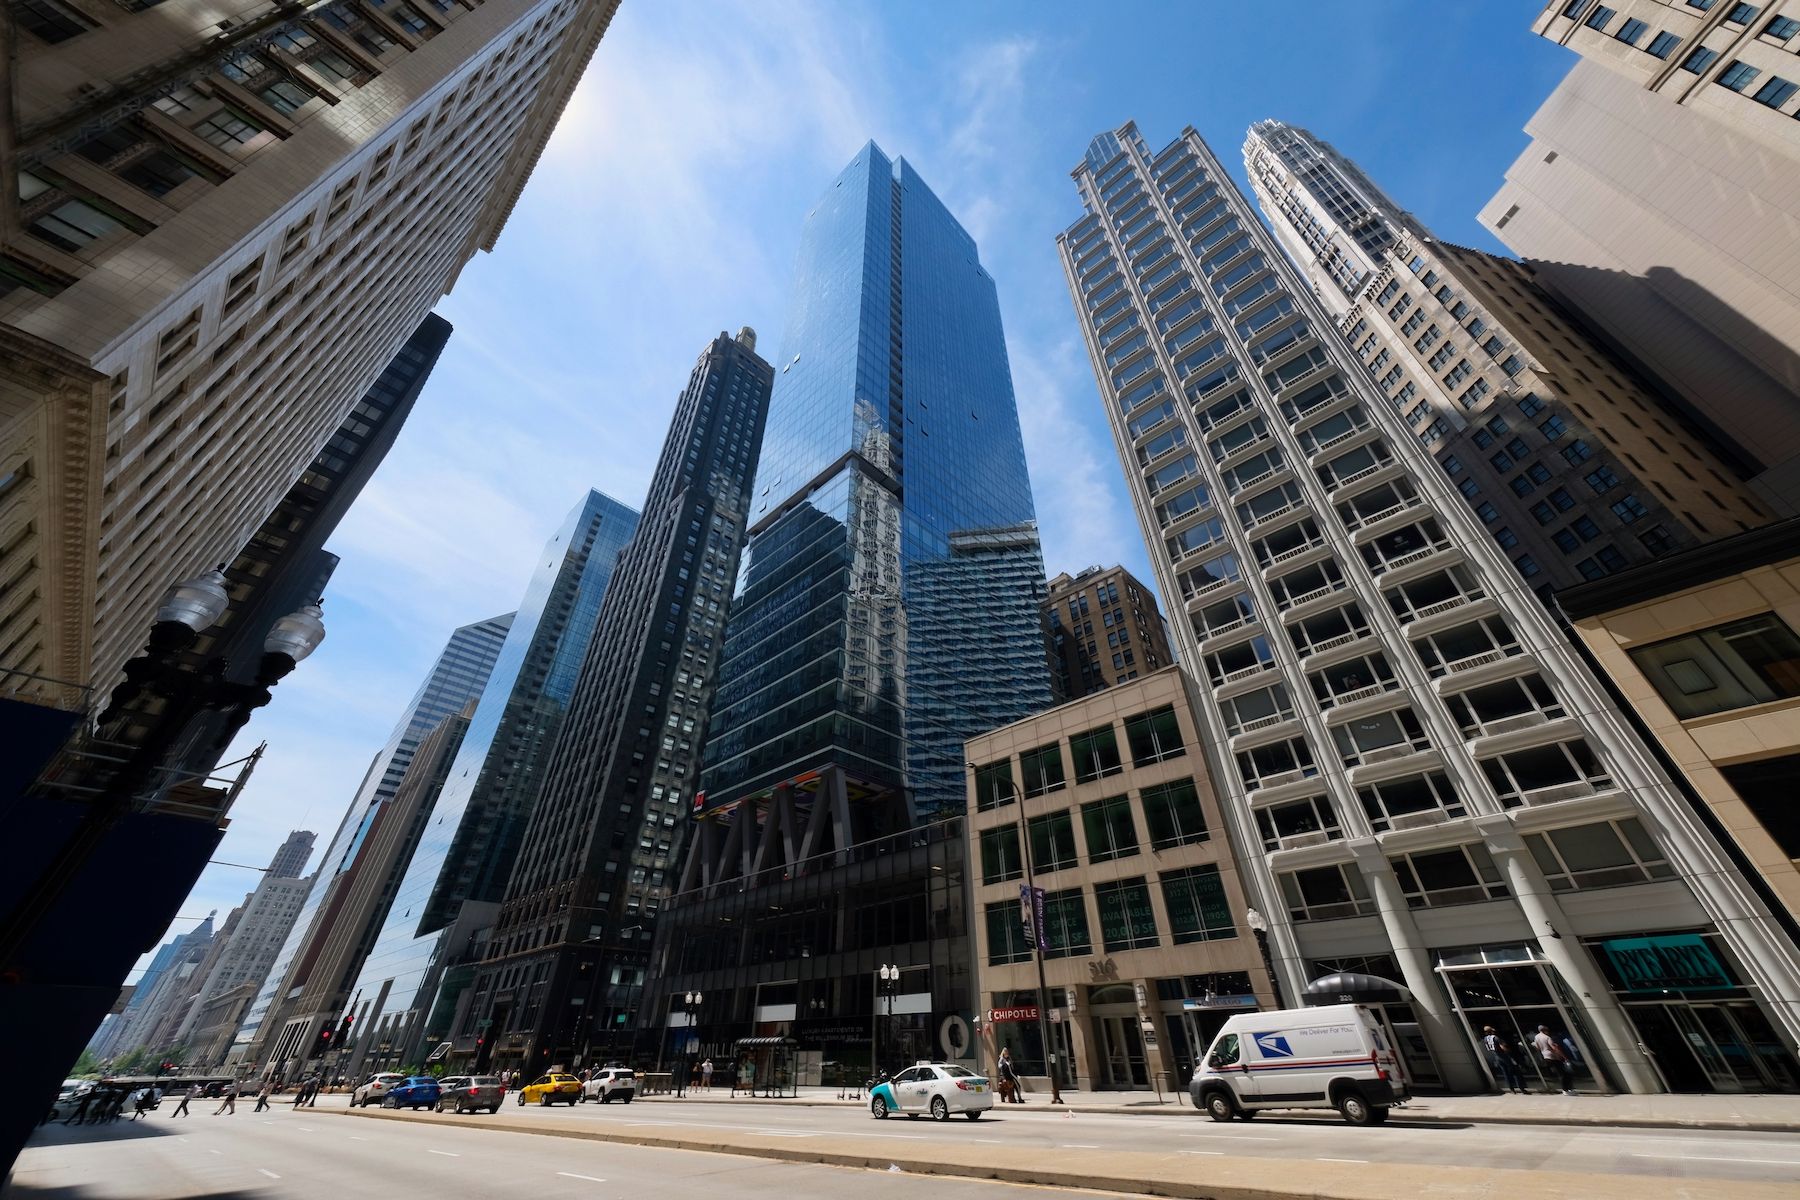 A Final Look at the Completed 300 N Michigan Avenue in the Loop